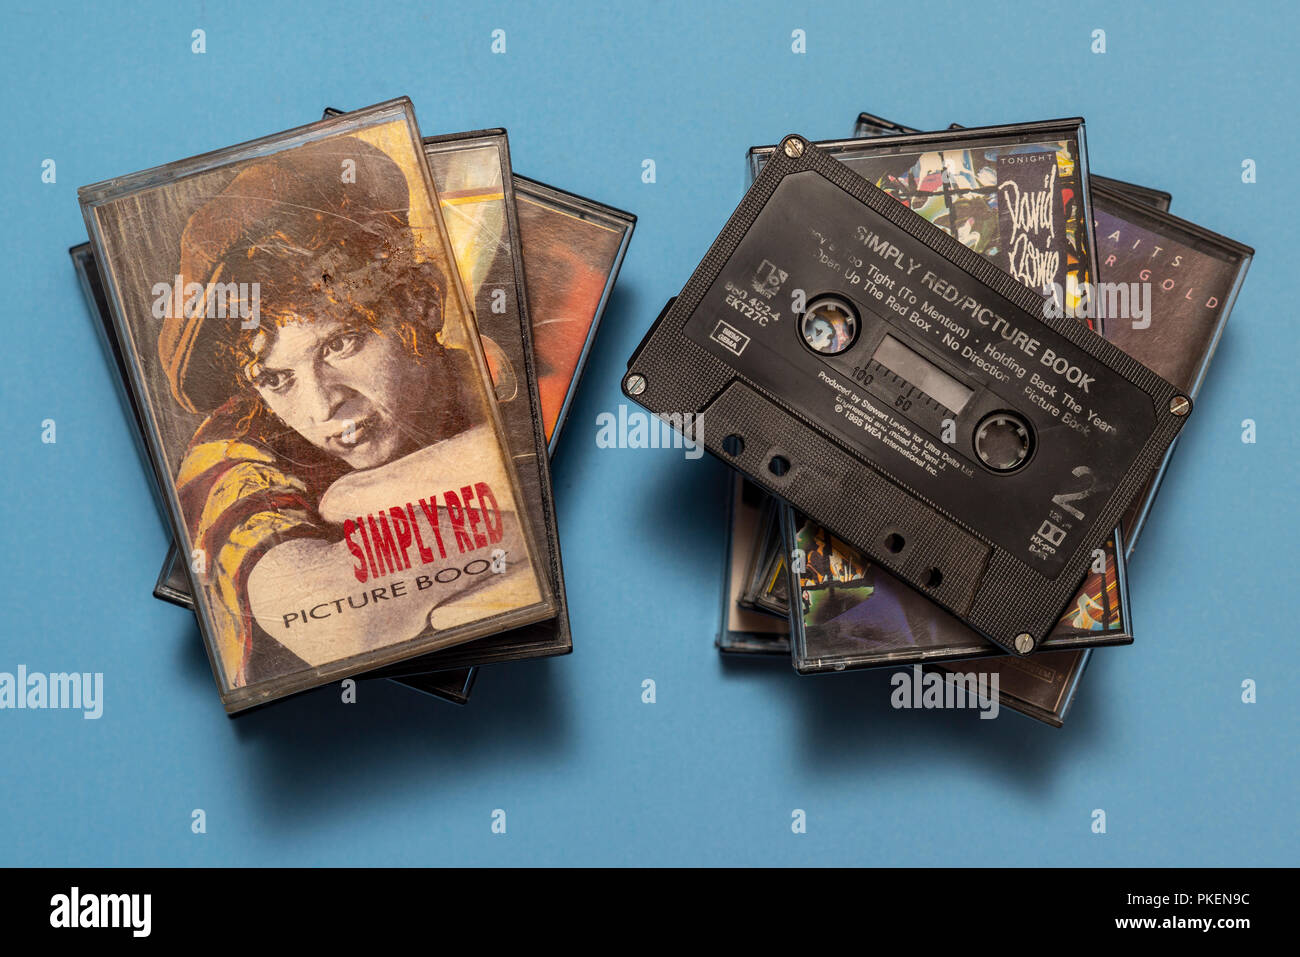 compact audio cassette of Simply Red, Picture Book album with art work. Stock Photo